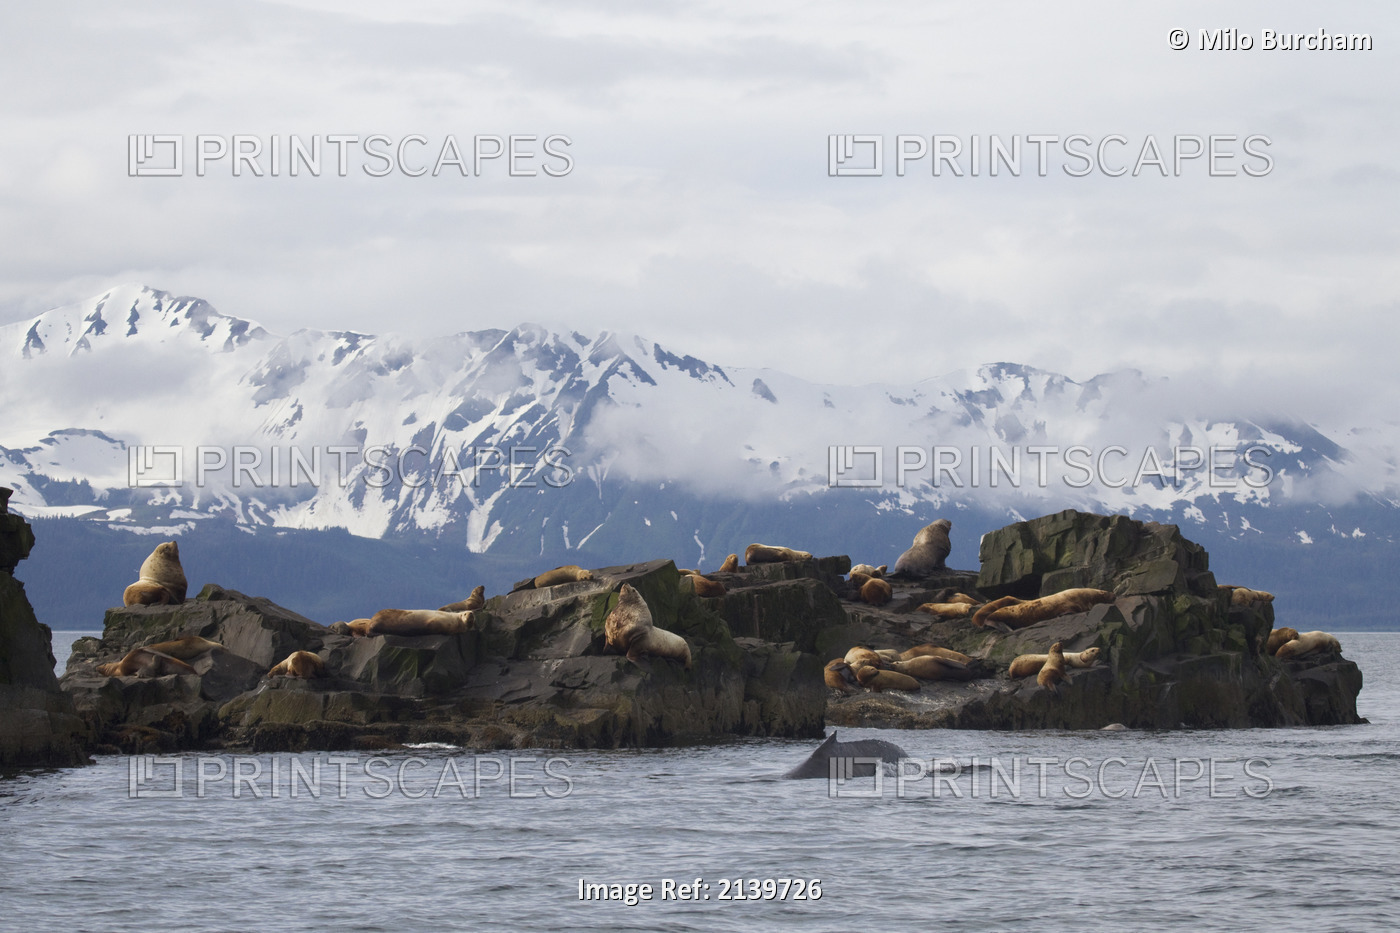 Steller Sea Lions Hauled Out At At The Needle With A Humpback Whale Surfacing ...